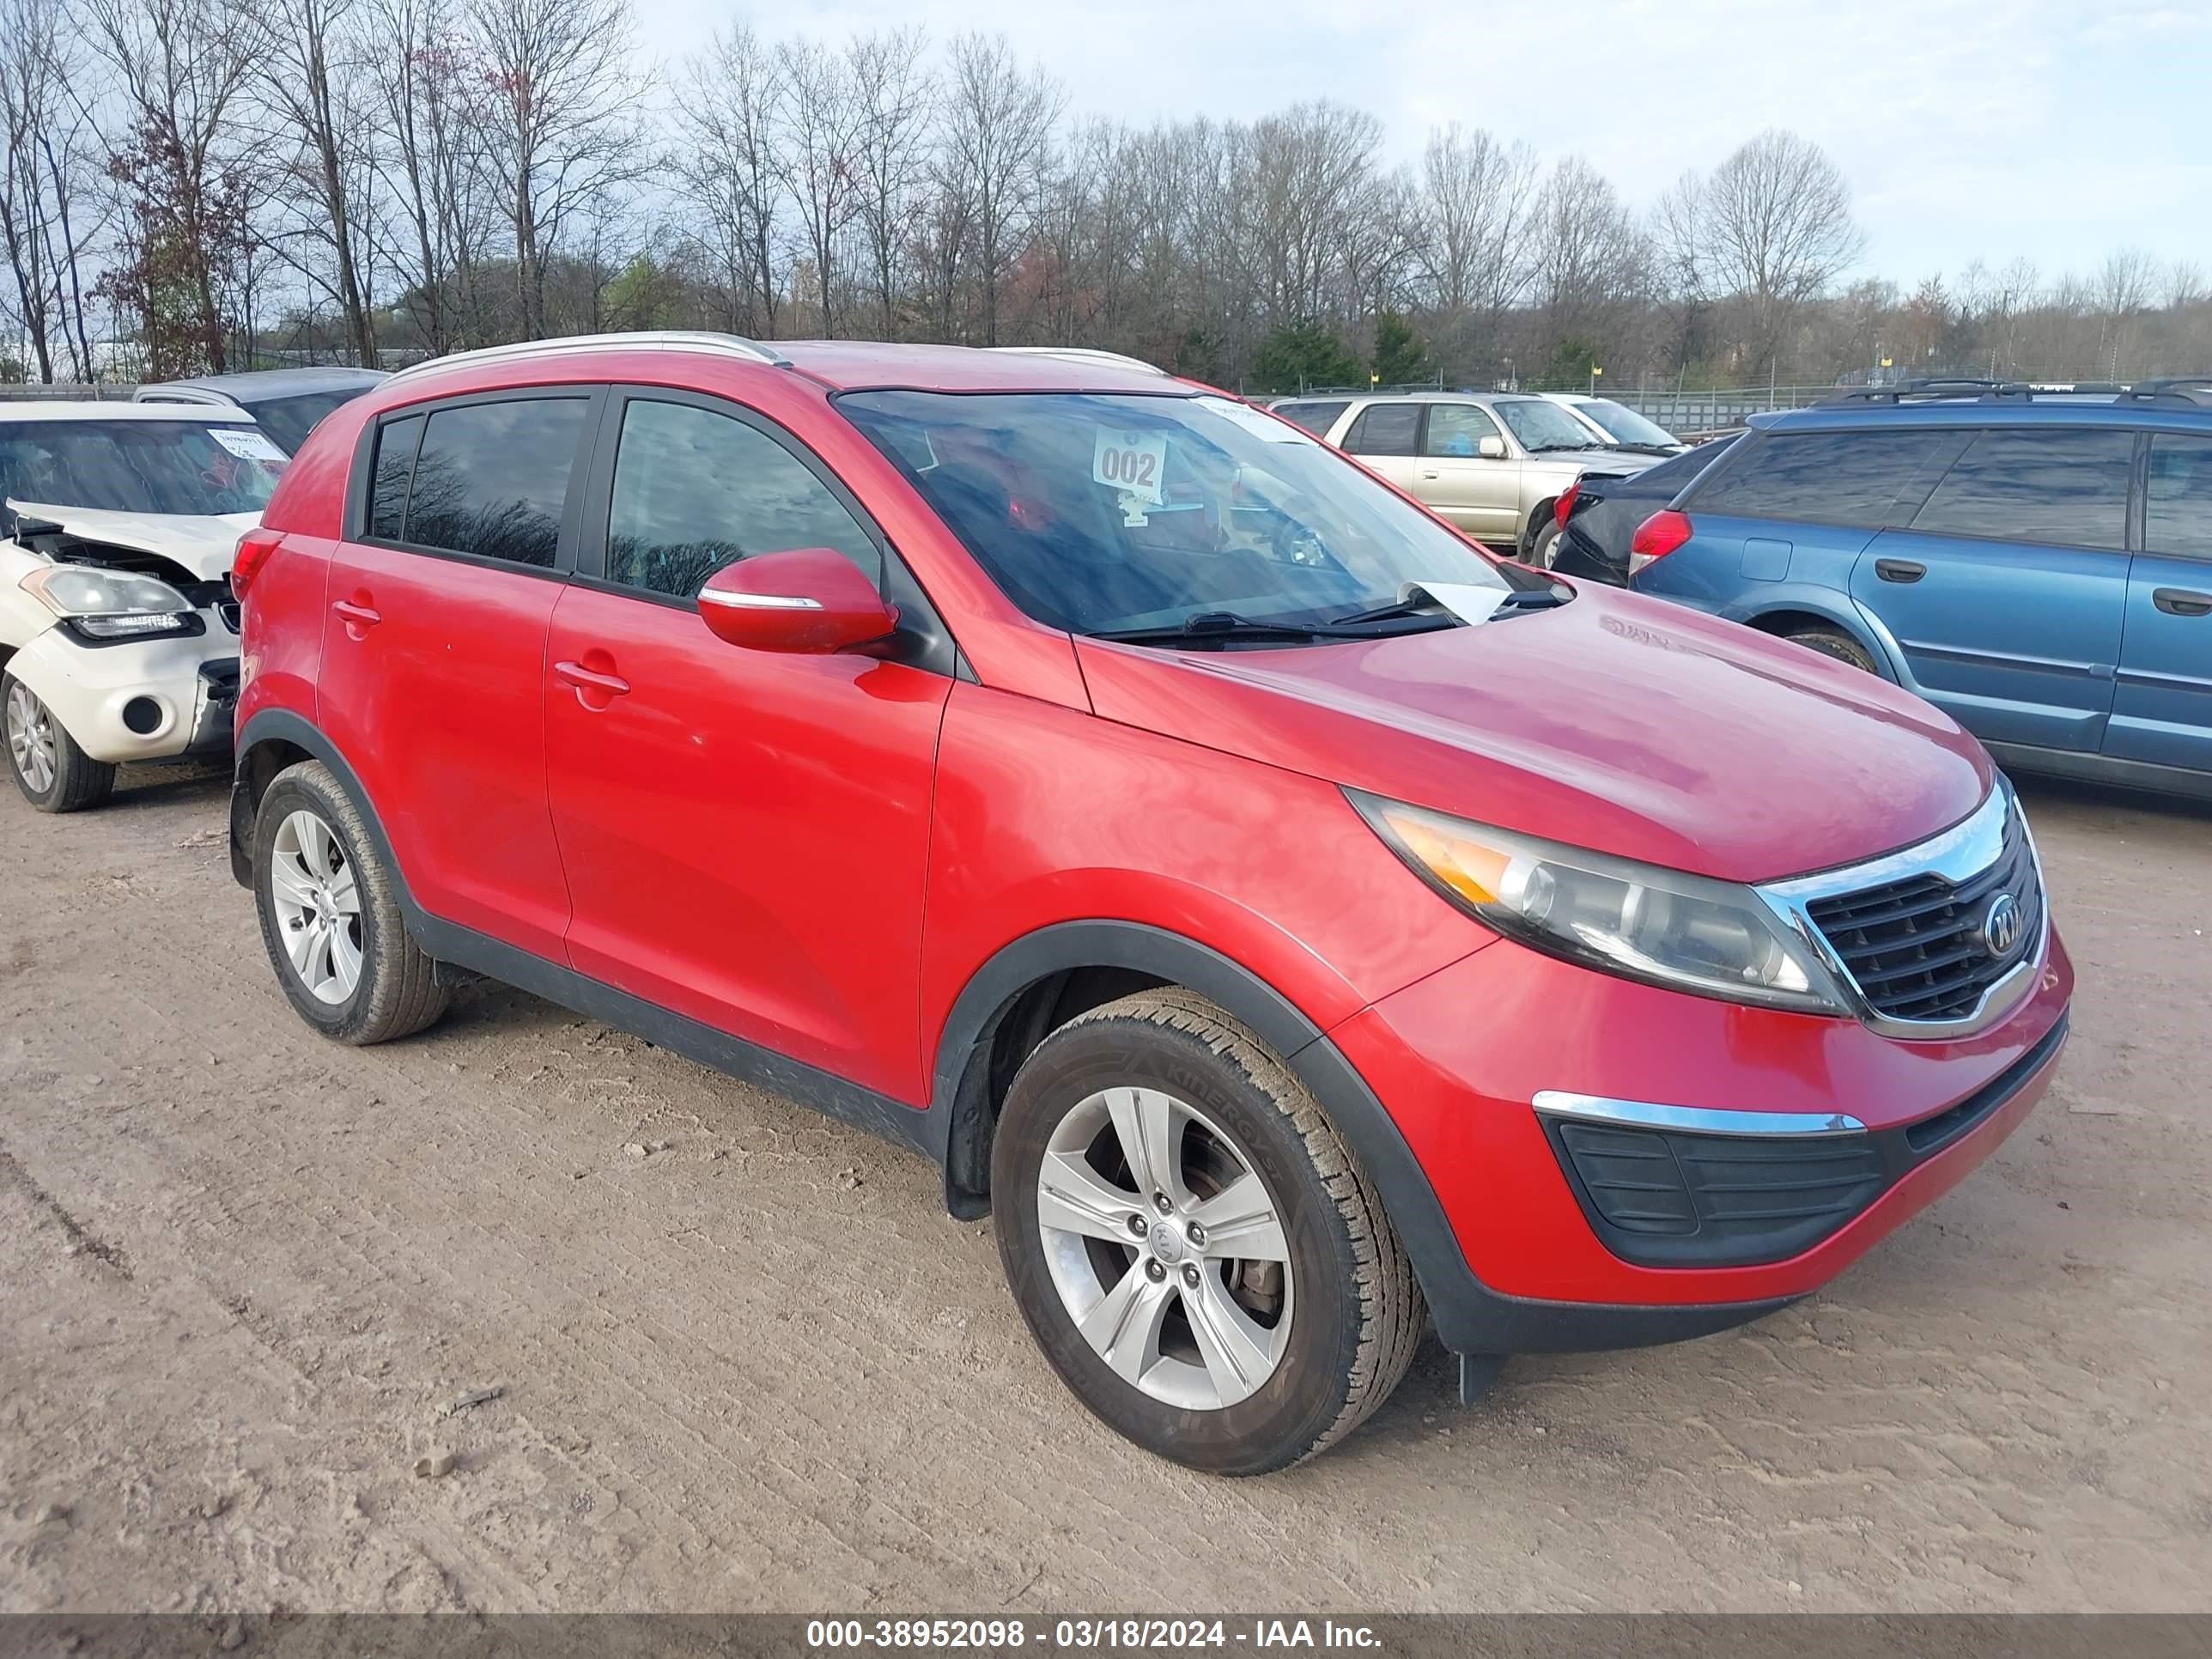 vin: KNDPB3A25D7394473 KNDPB3A25D7394473 2013 kia sportage 2400 for Sale in 37914, 3634 E. Governor John Sevier Hwy, Knoxville, Tennessee, USA